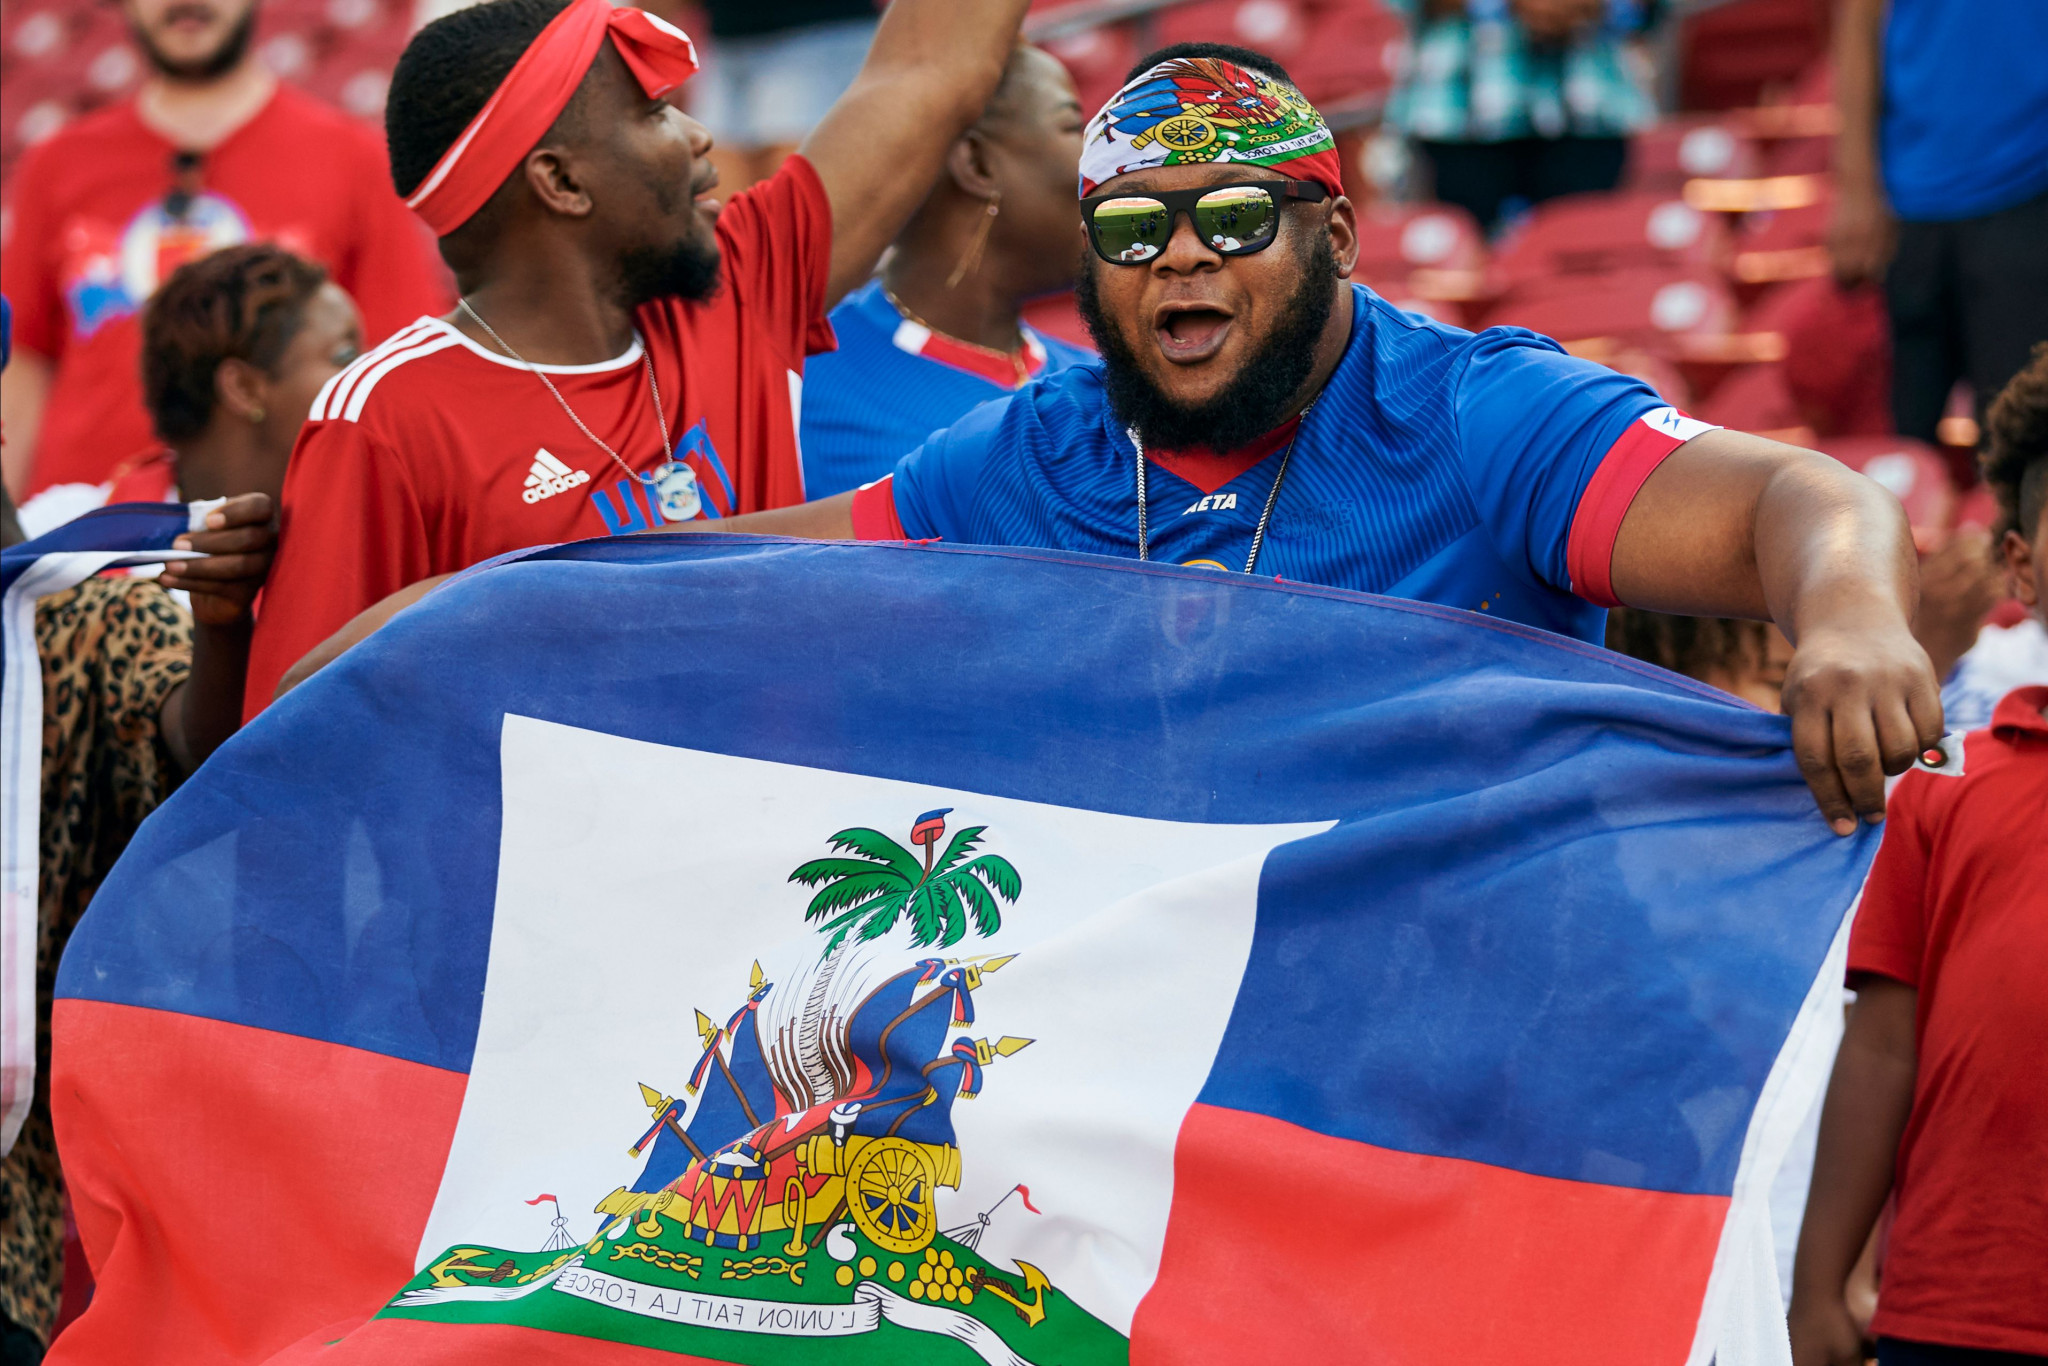 Haiti progressed to the knock out stage after earning their second win ©Getty Images